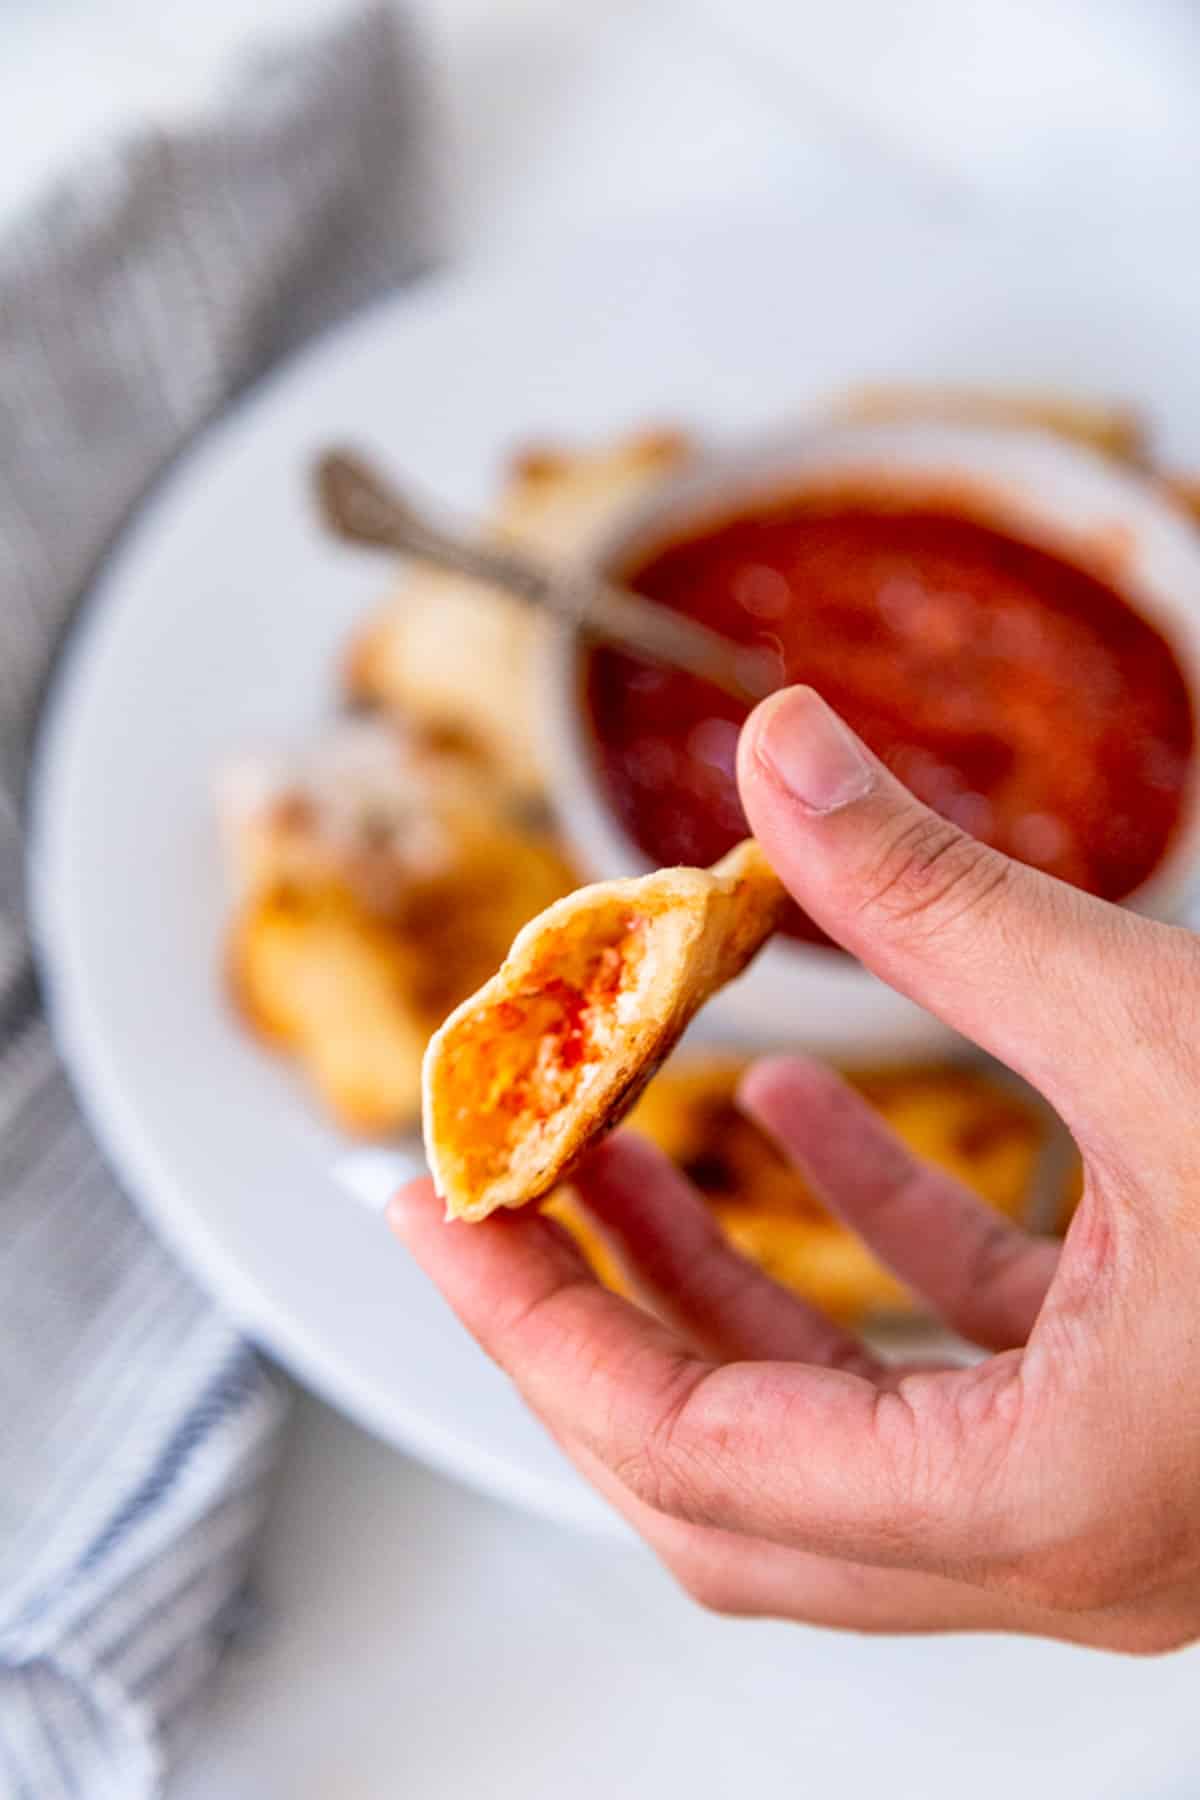 A hand holding a pizza roll with the filling showing.